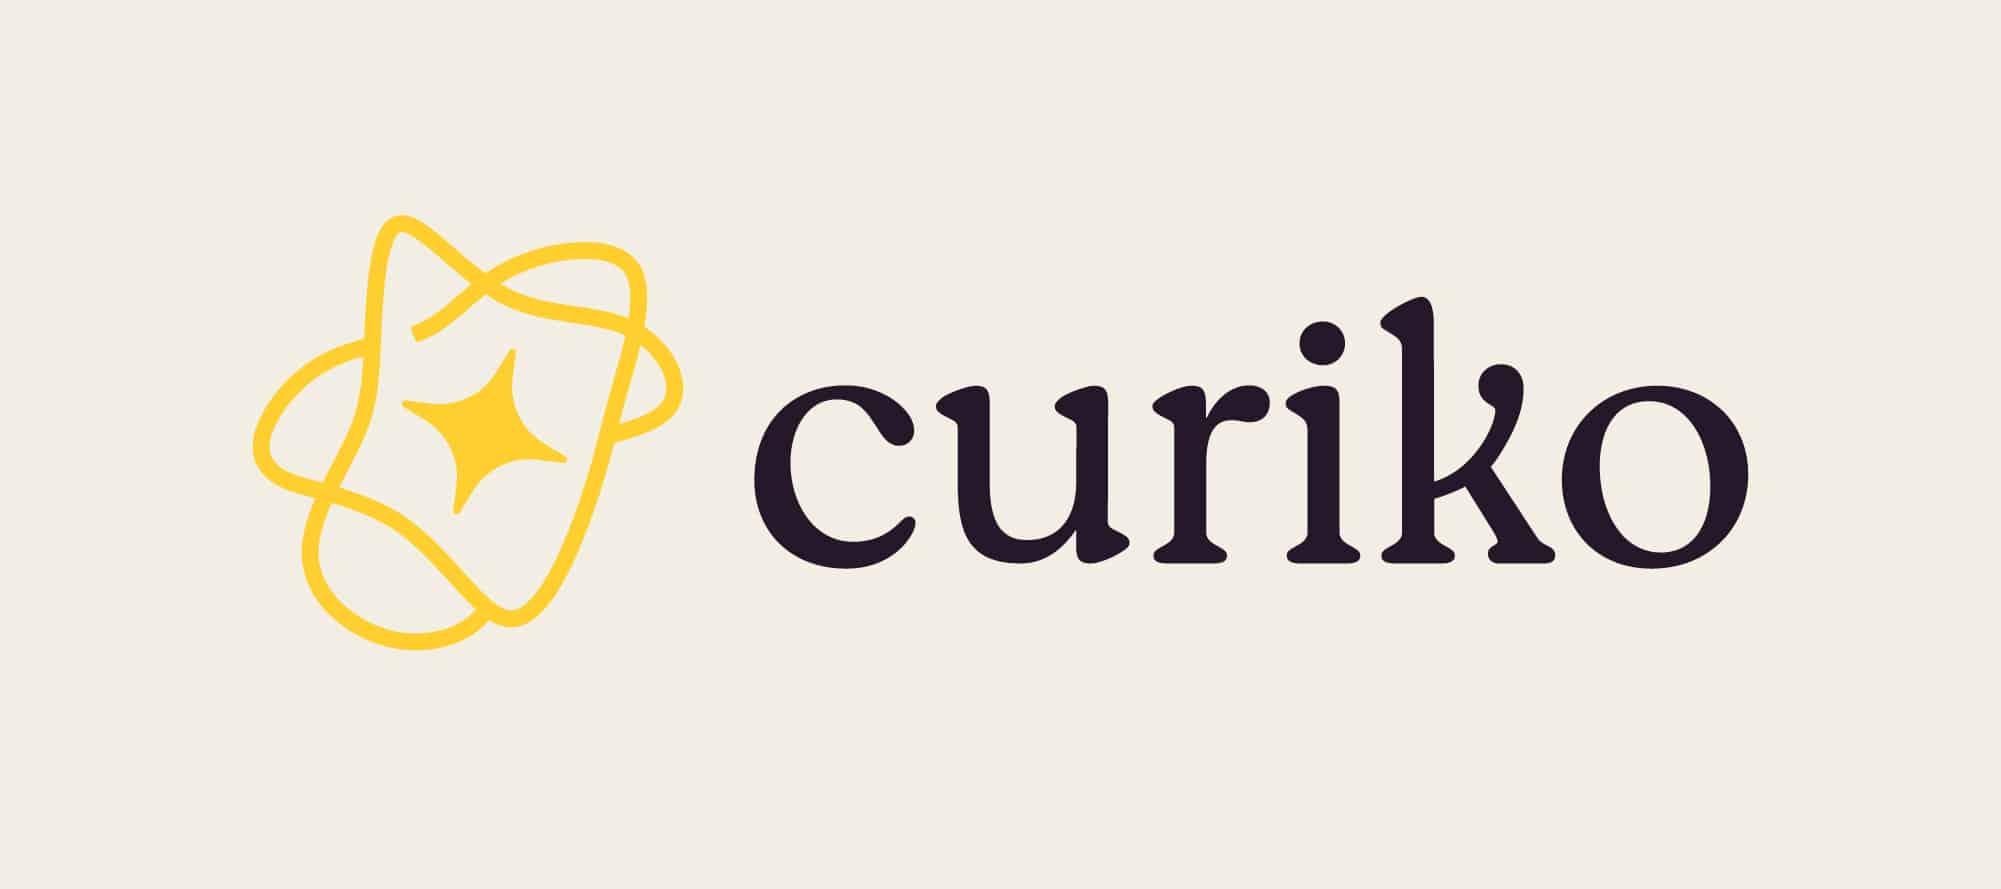 The nonprofit logo of Curiko, featuring its signature galaxy shape and distinctive typeface.